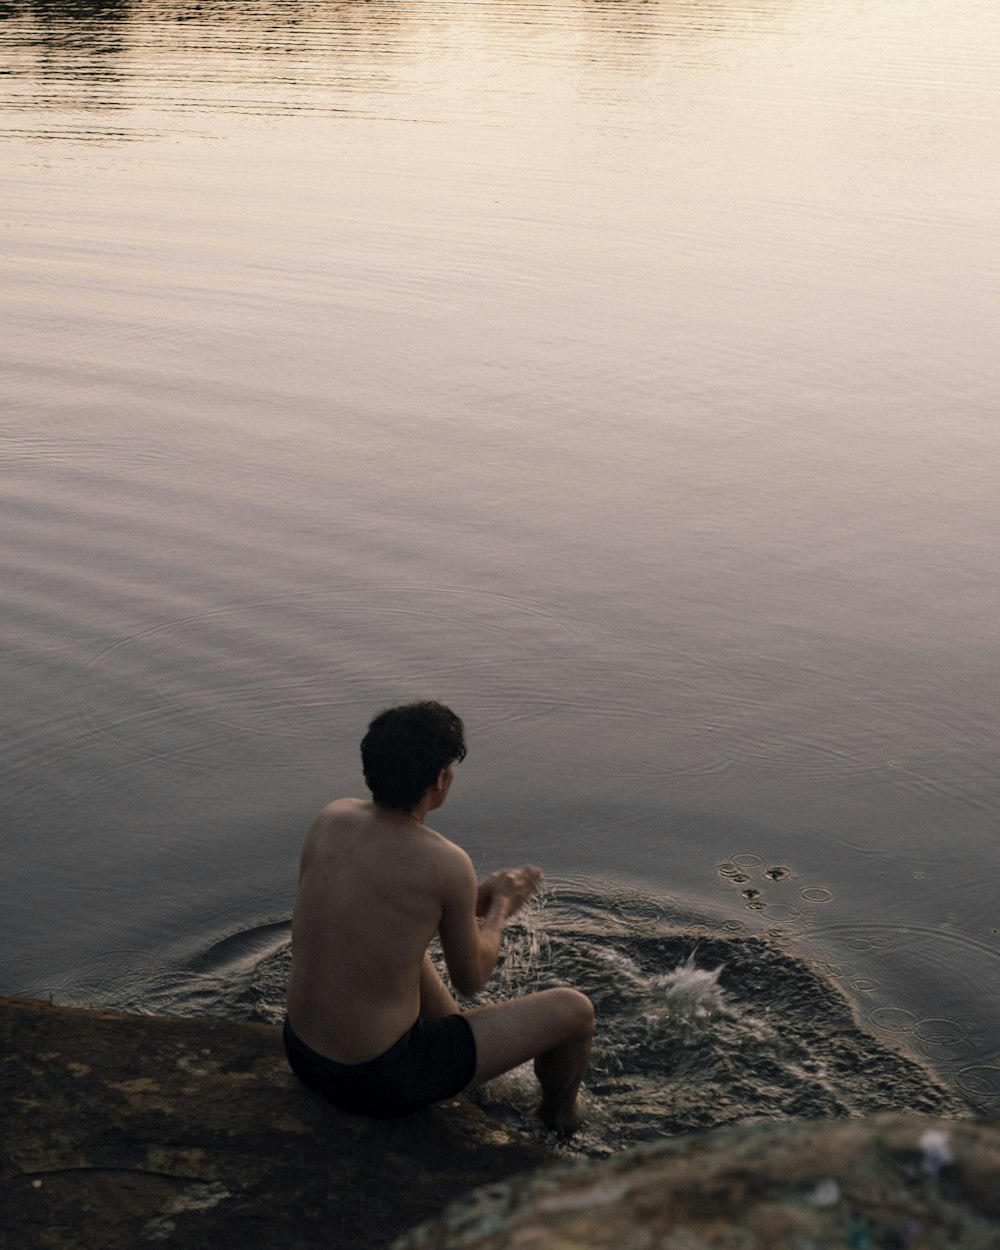 a man sitting on the edge of a body of water